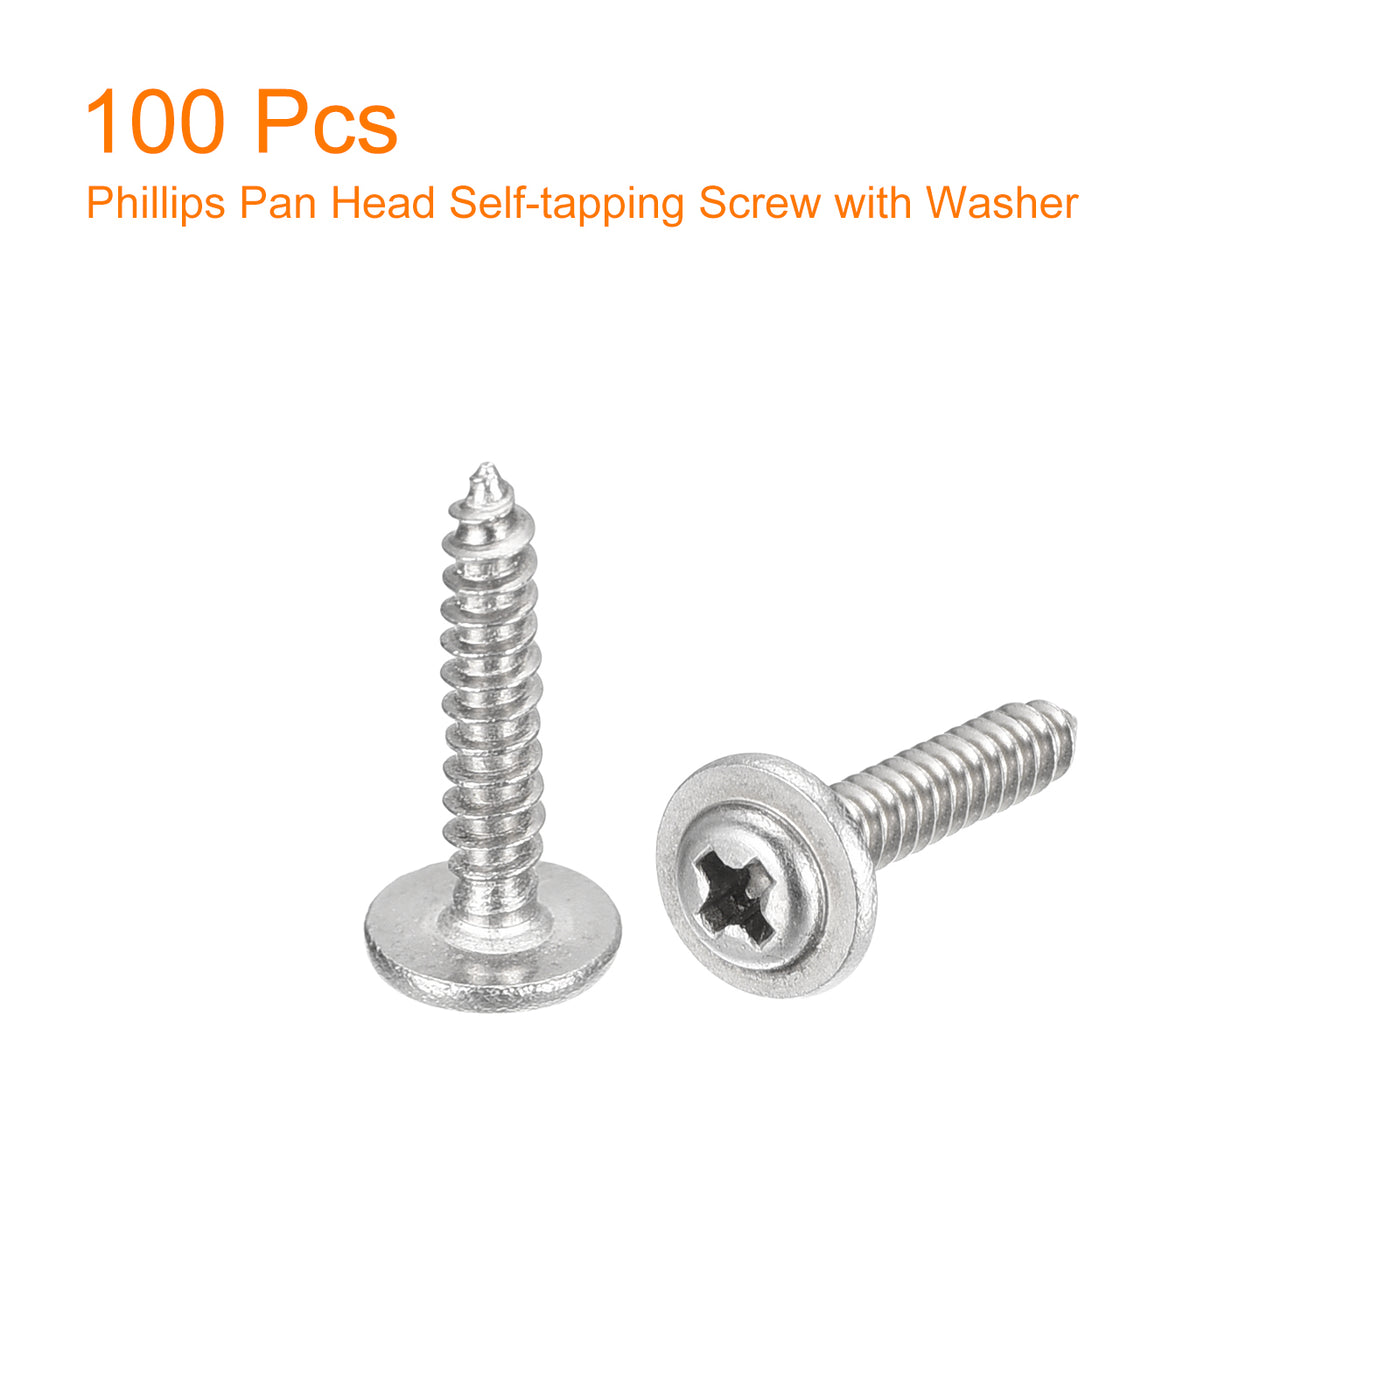 uxcell Uxcell ST2.3x12mm Phillips Pan Head Self-tapping Screw with Washer, 100pcs - 304 Stainless Steel Wood Screw Full Thread (Silver)